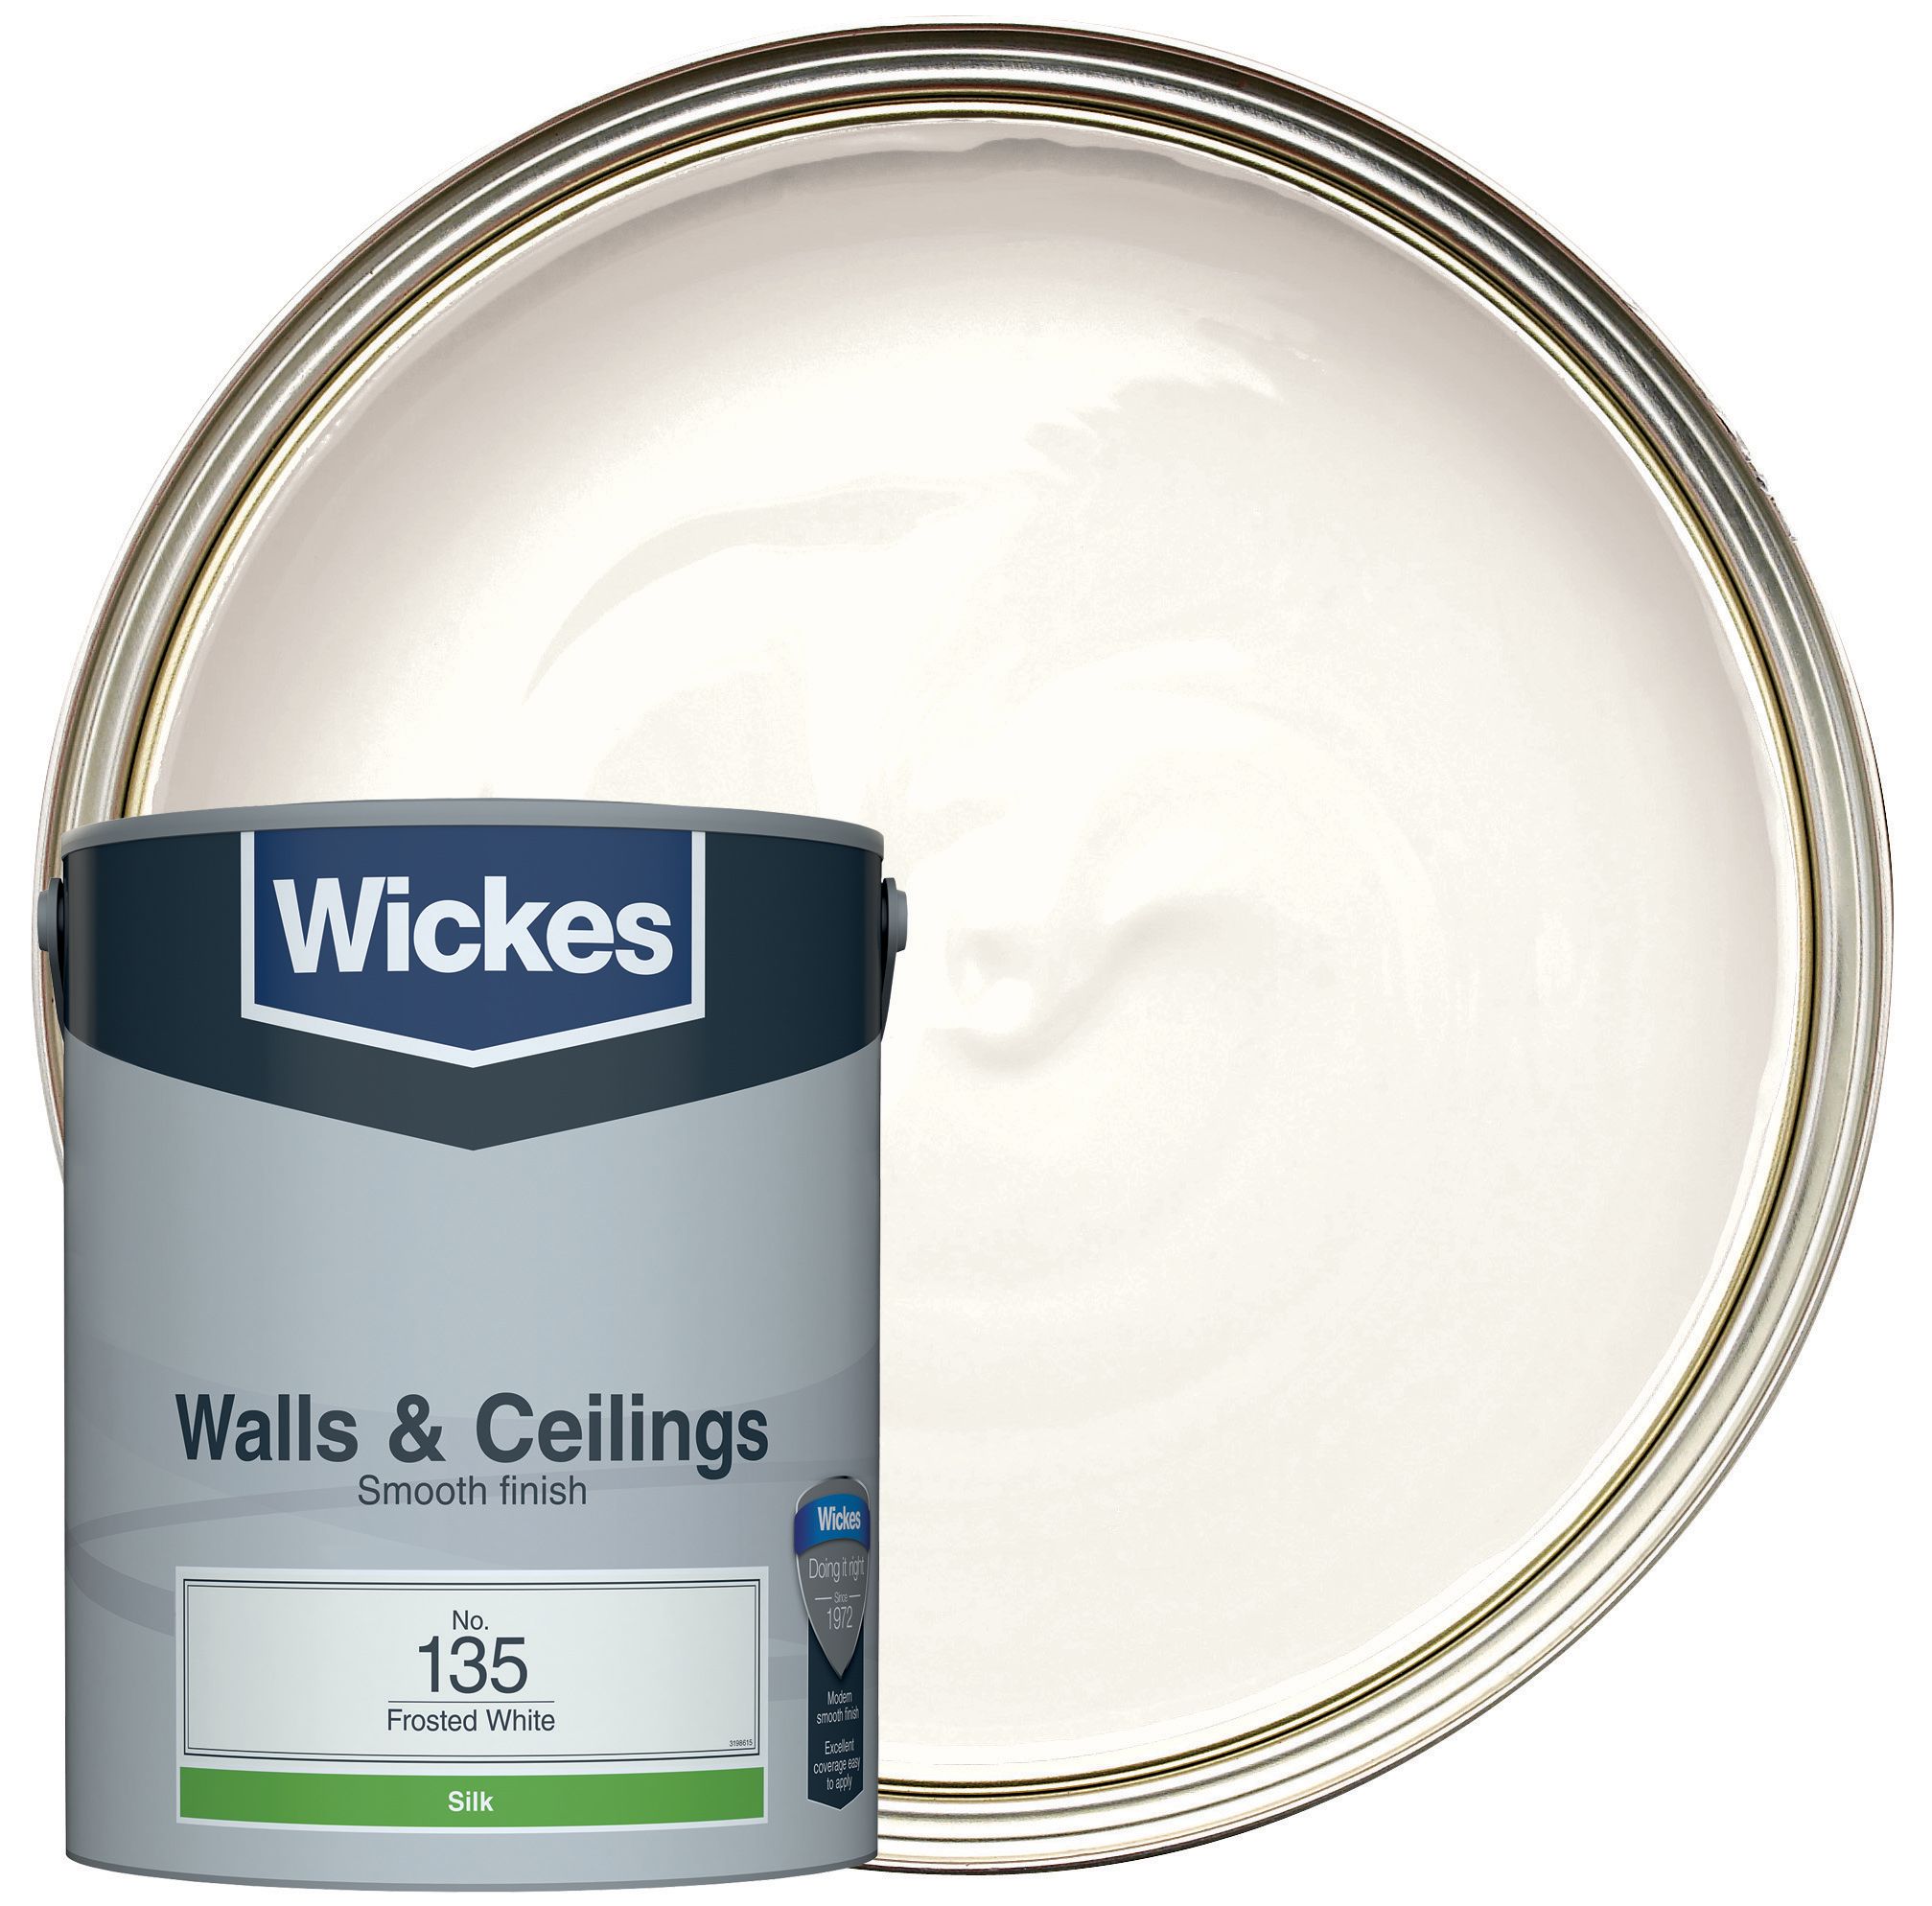 Wickes Vinyl Silk Emulsion Paint - Frosted White No.135 - 5L